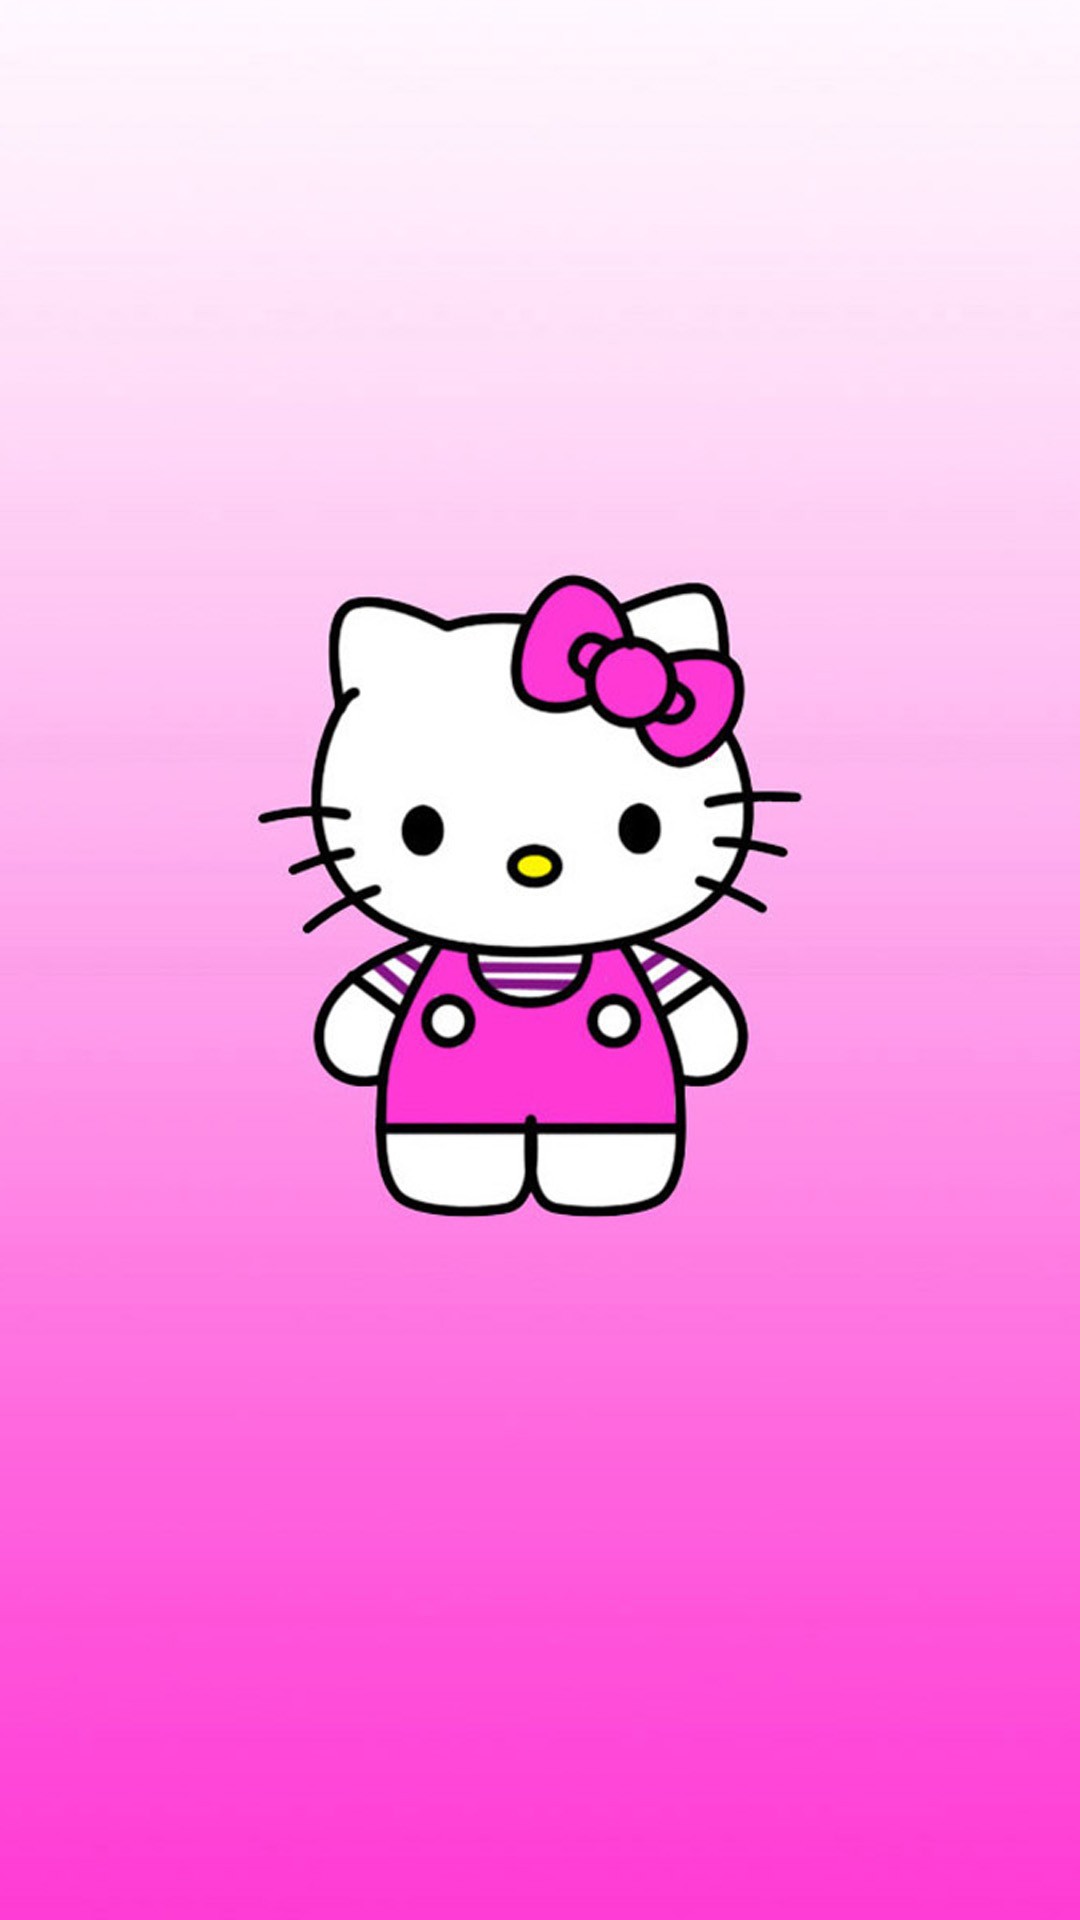 Sanrio Hello Kitty Wallpaper Android with image resolution 1080x1920 pixel. You can make this wallpaper for your Android backgrounds, Tablet, Smartphones Screensavers and Mobile Phone Lock Screen